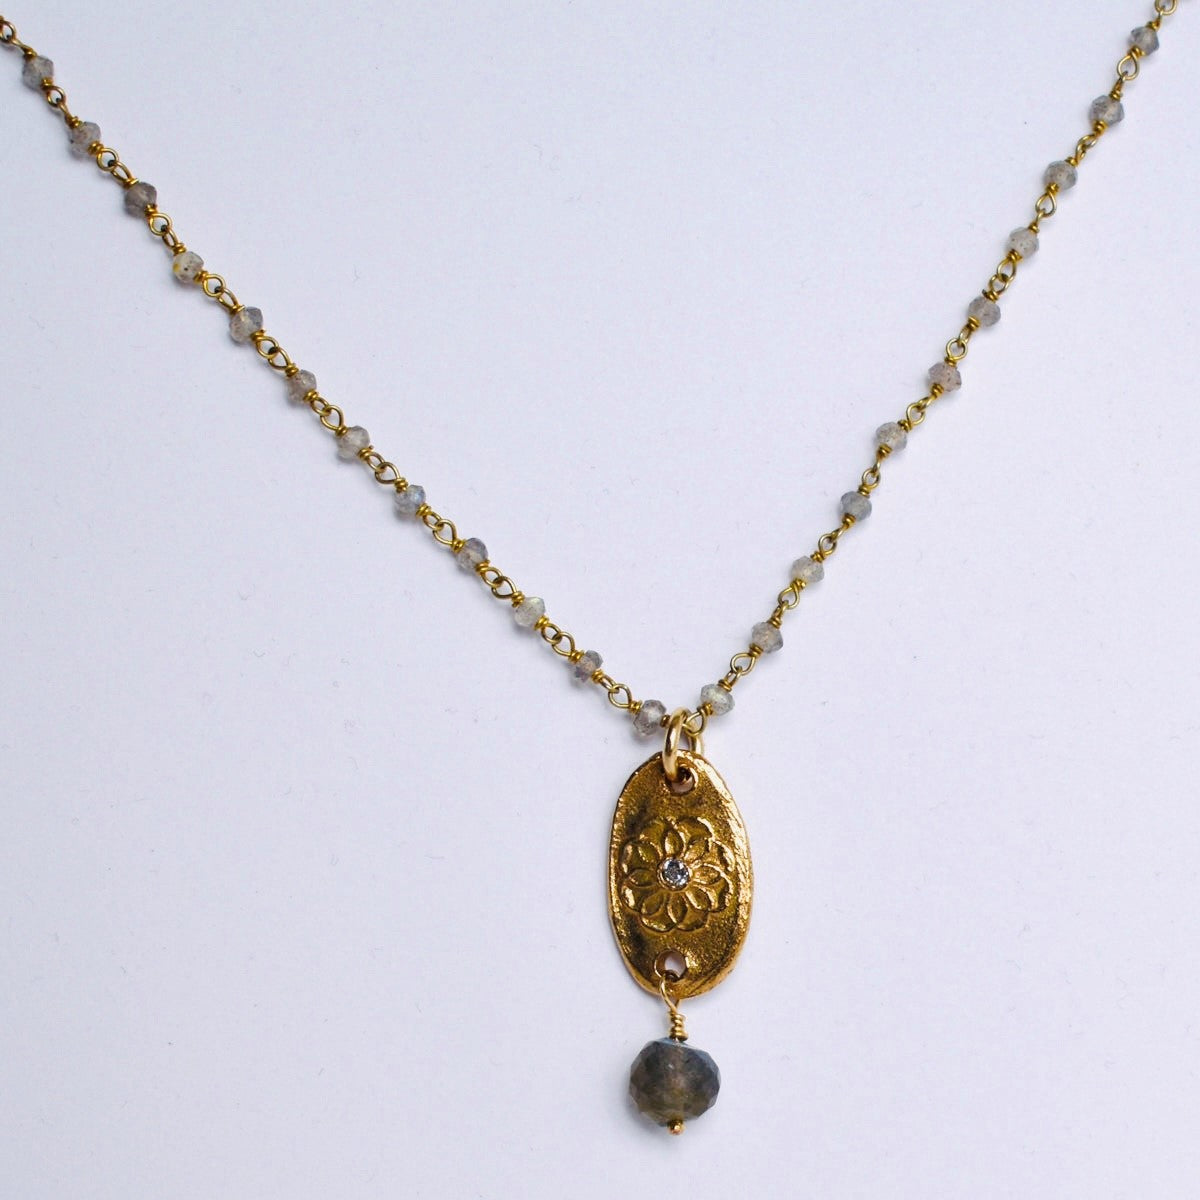 Handformed bronze pendant with CZ, faceted Labrodite bead and handmade chain